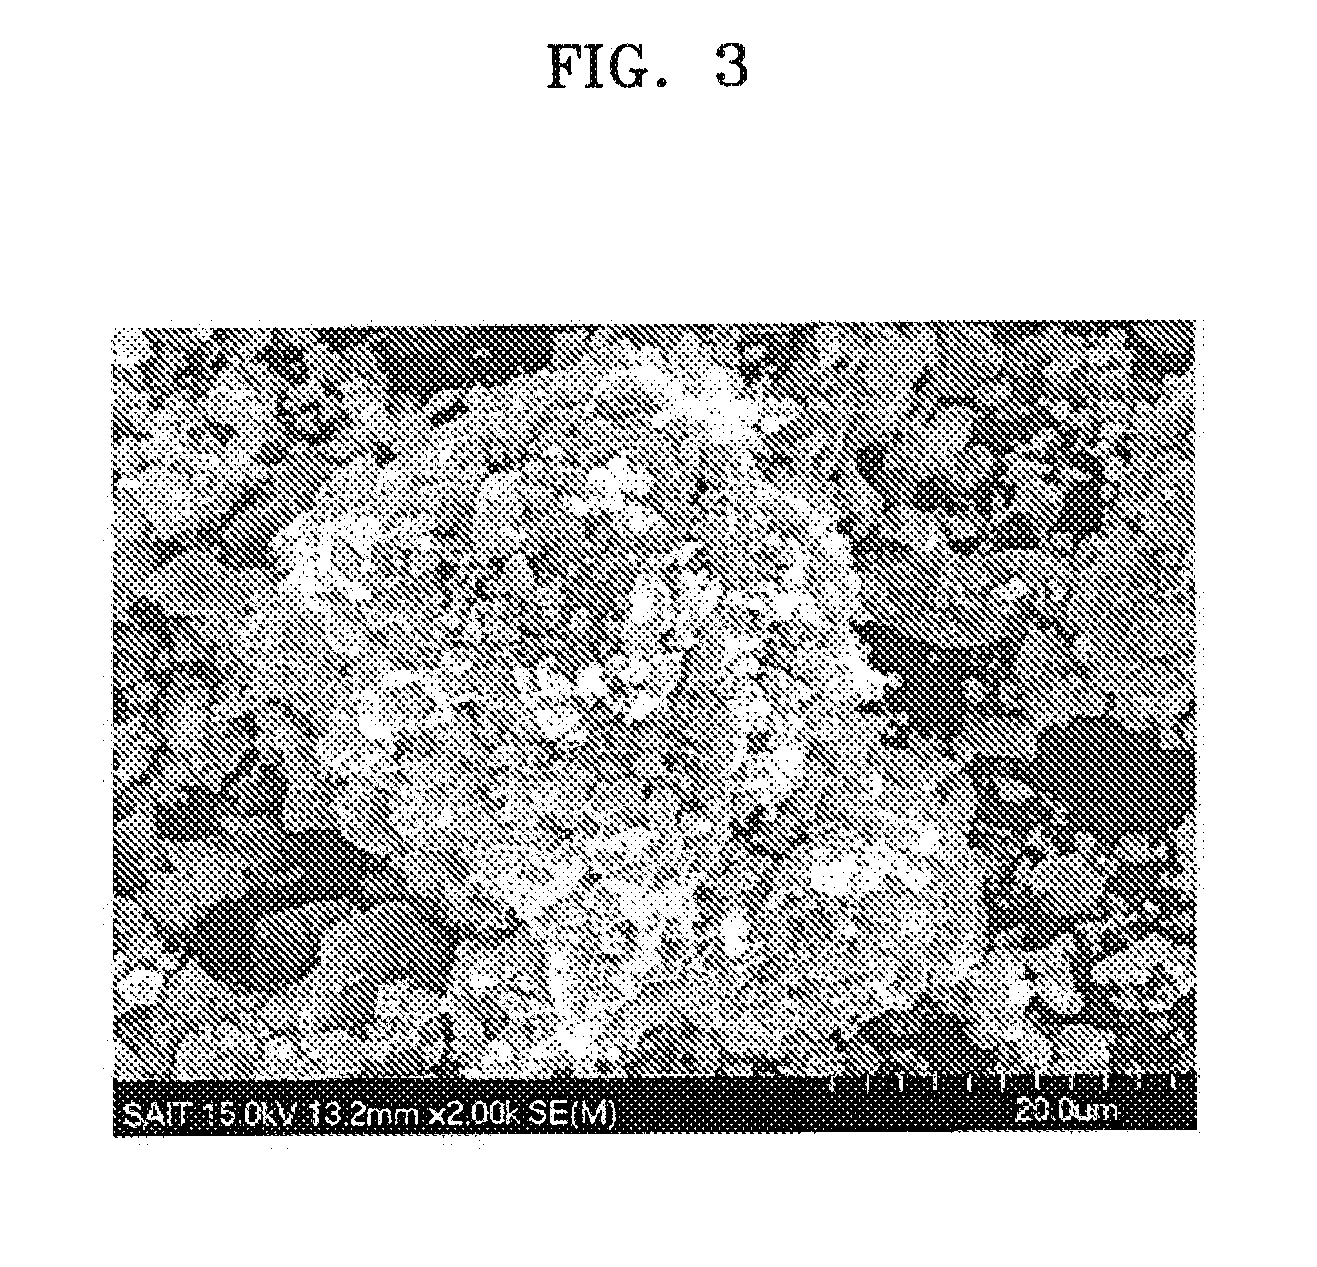 Anode active material and method of preparing the same